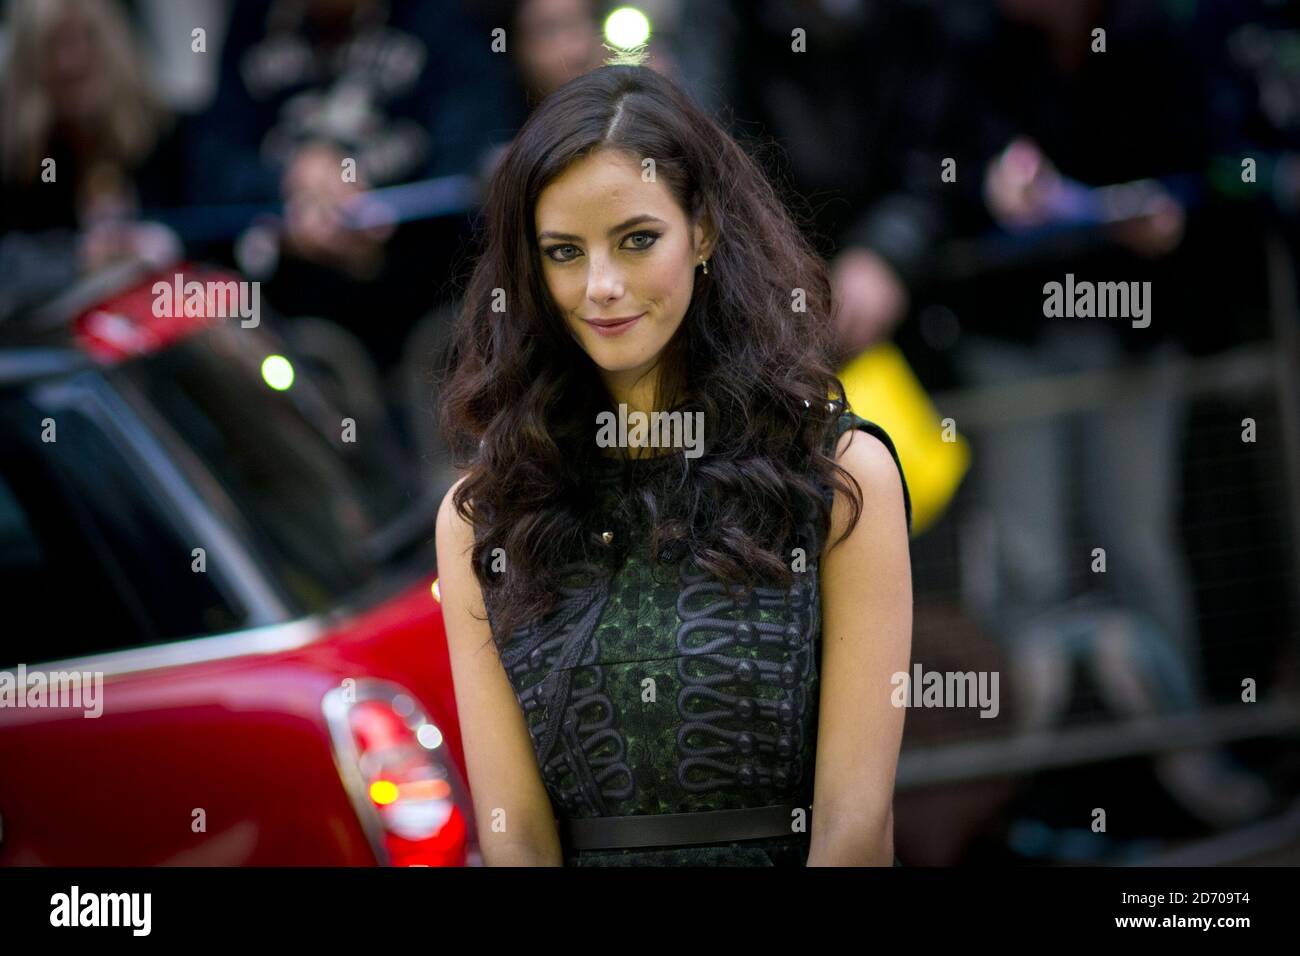 Kaya Scodelario attending the premiere of Now Is Good, at the Curzon Cinema in Mayfair, central London. Stock Photo